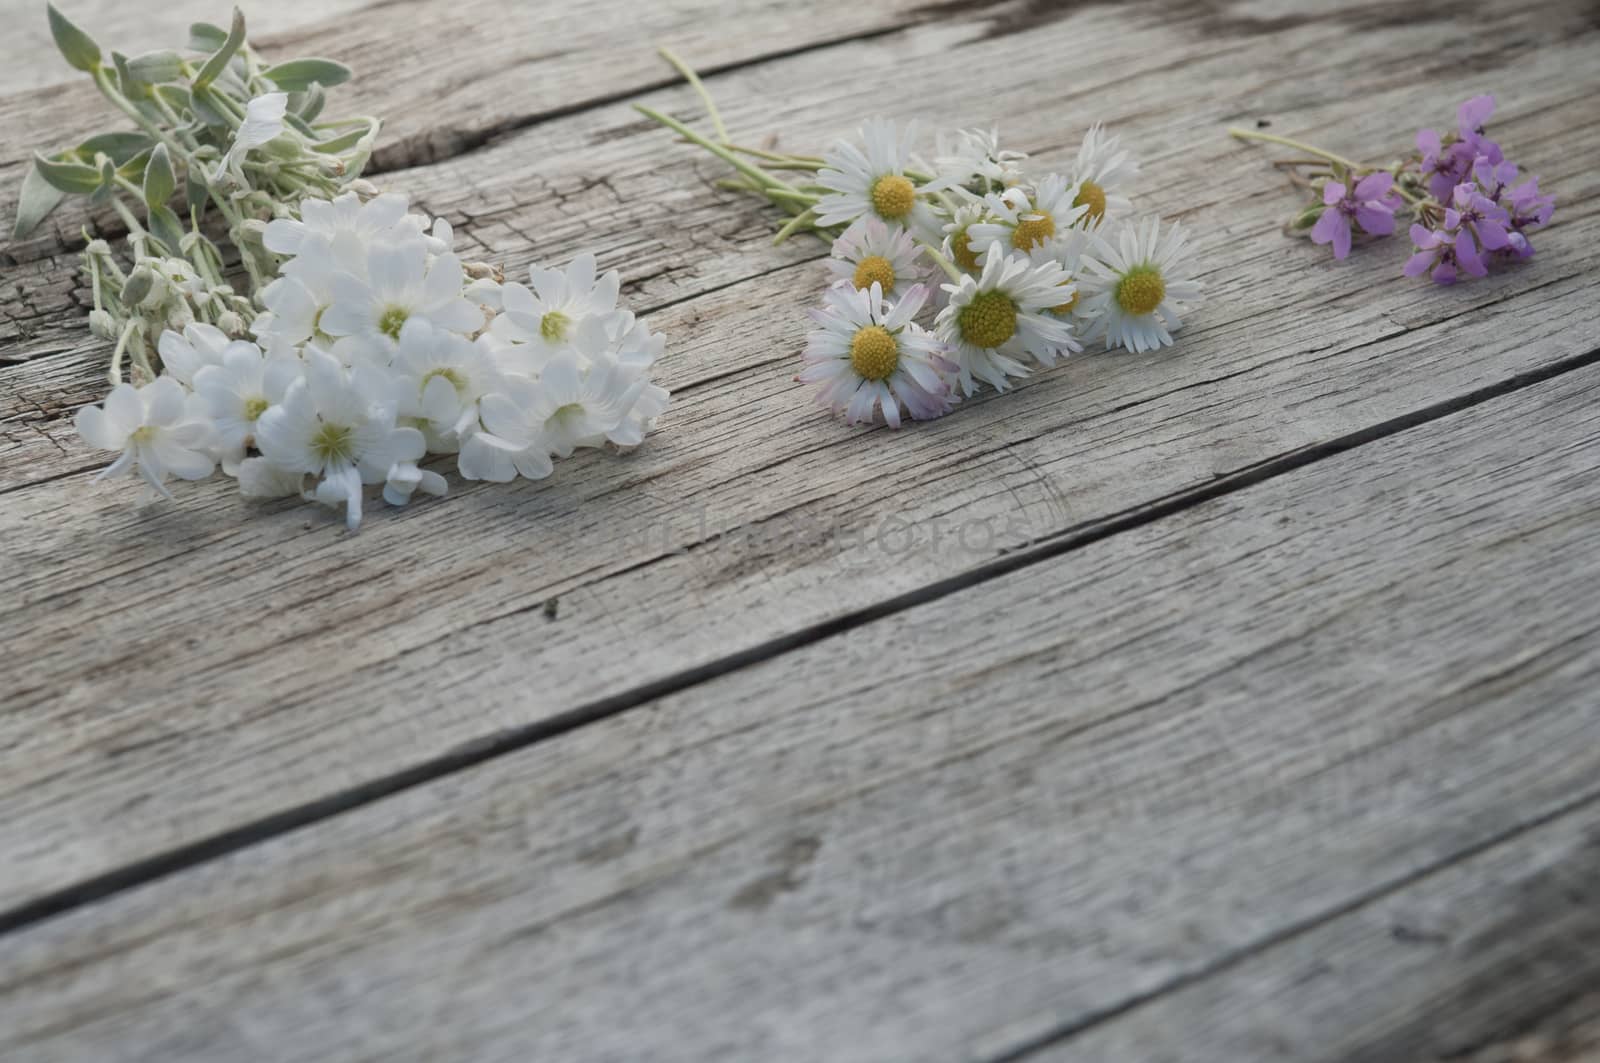 Small bunches of flowers on wooden background copy space textured surface